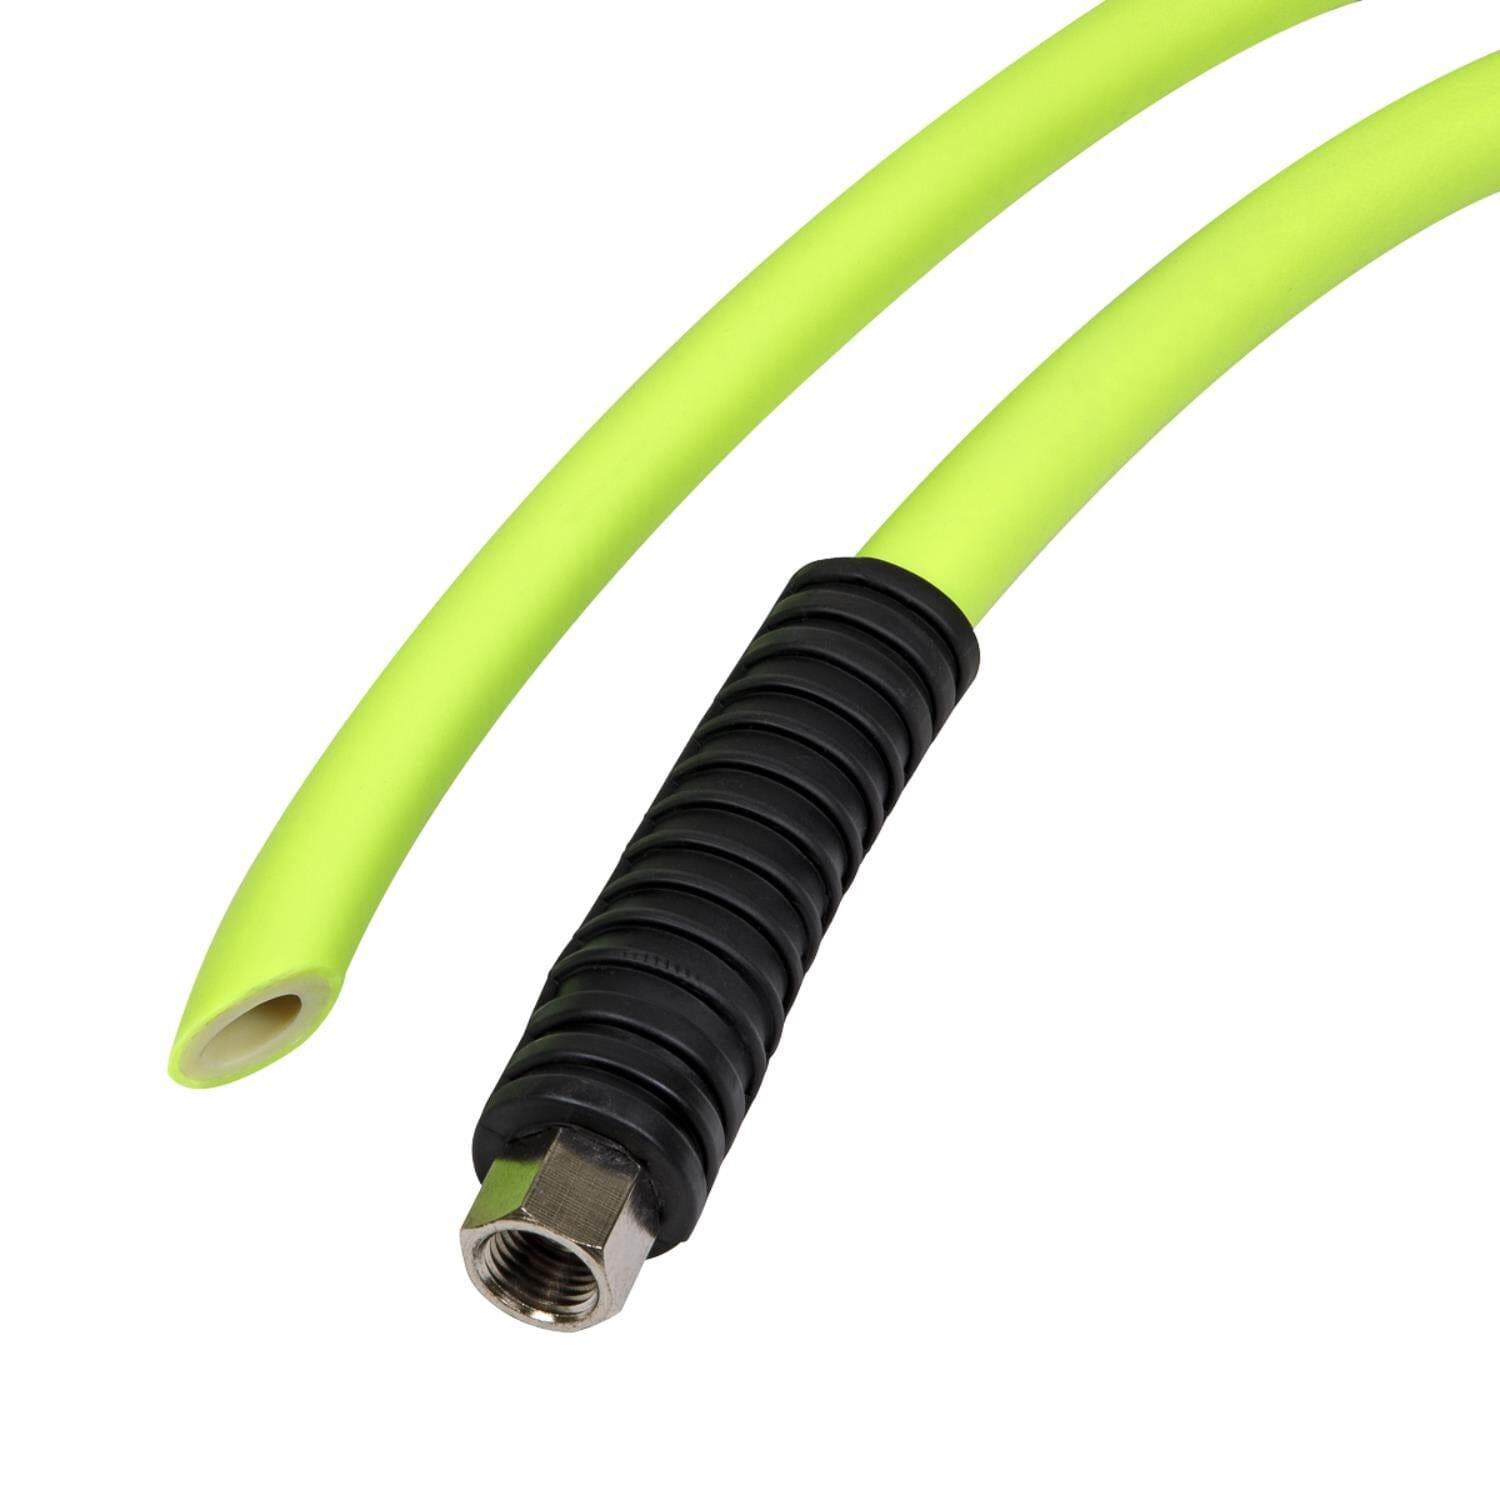 Sealey Air Hose 10m x 8mm Hybrid High-Visibility with 1/4" BSP Unions AHHC10G - Tools 2U Direct SW